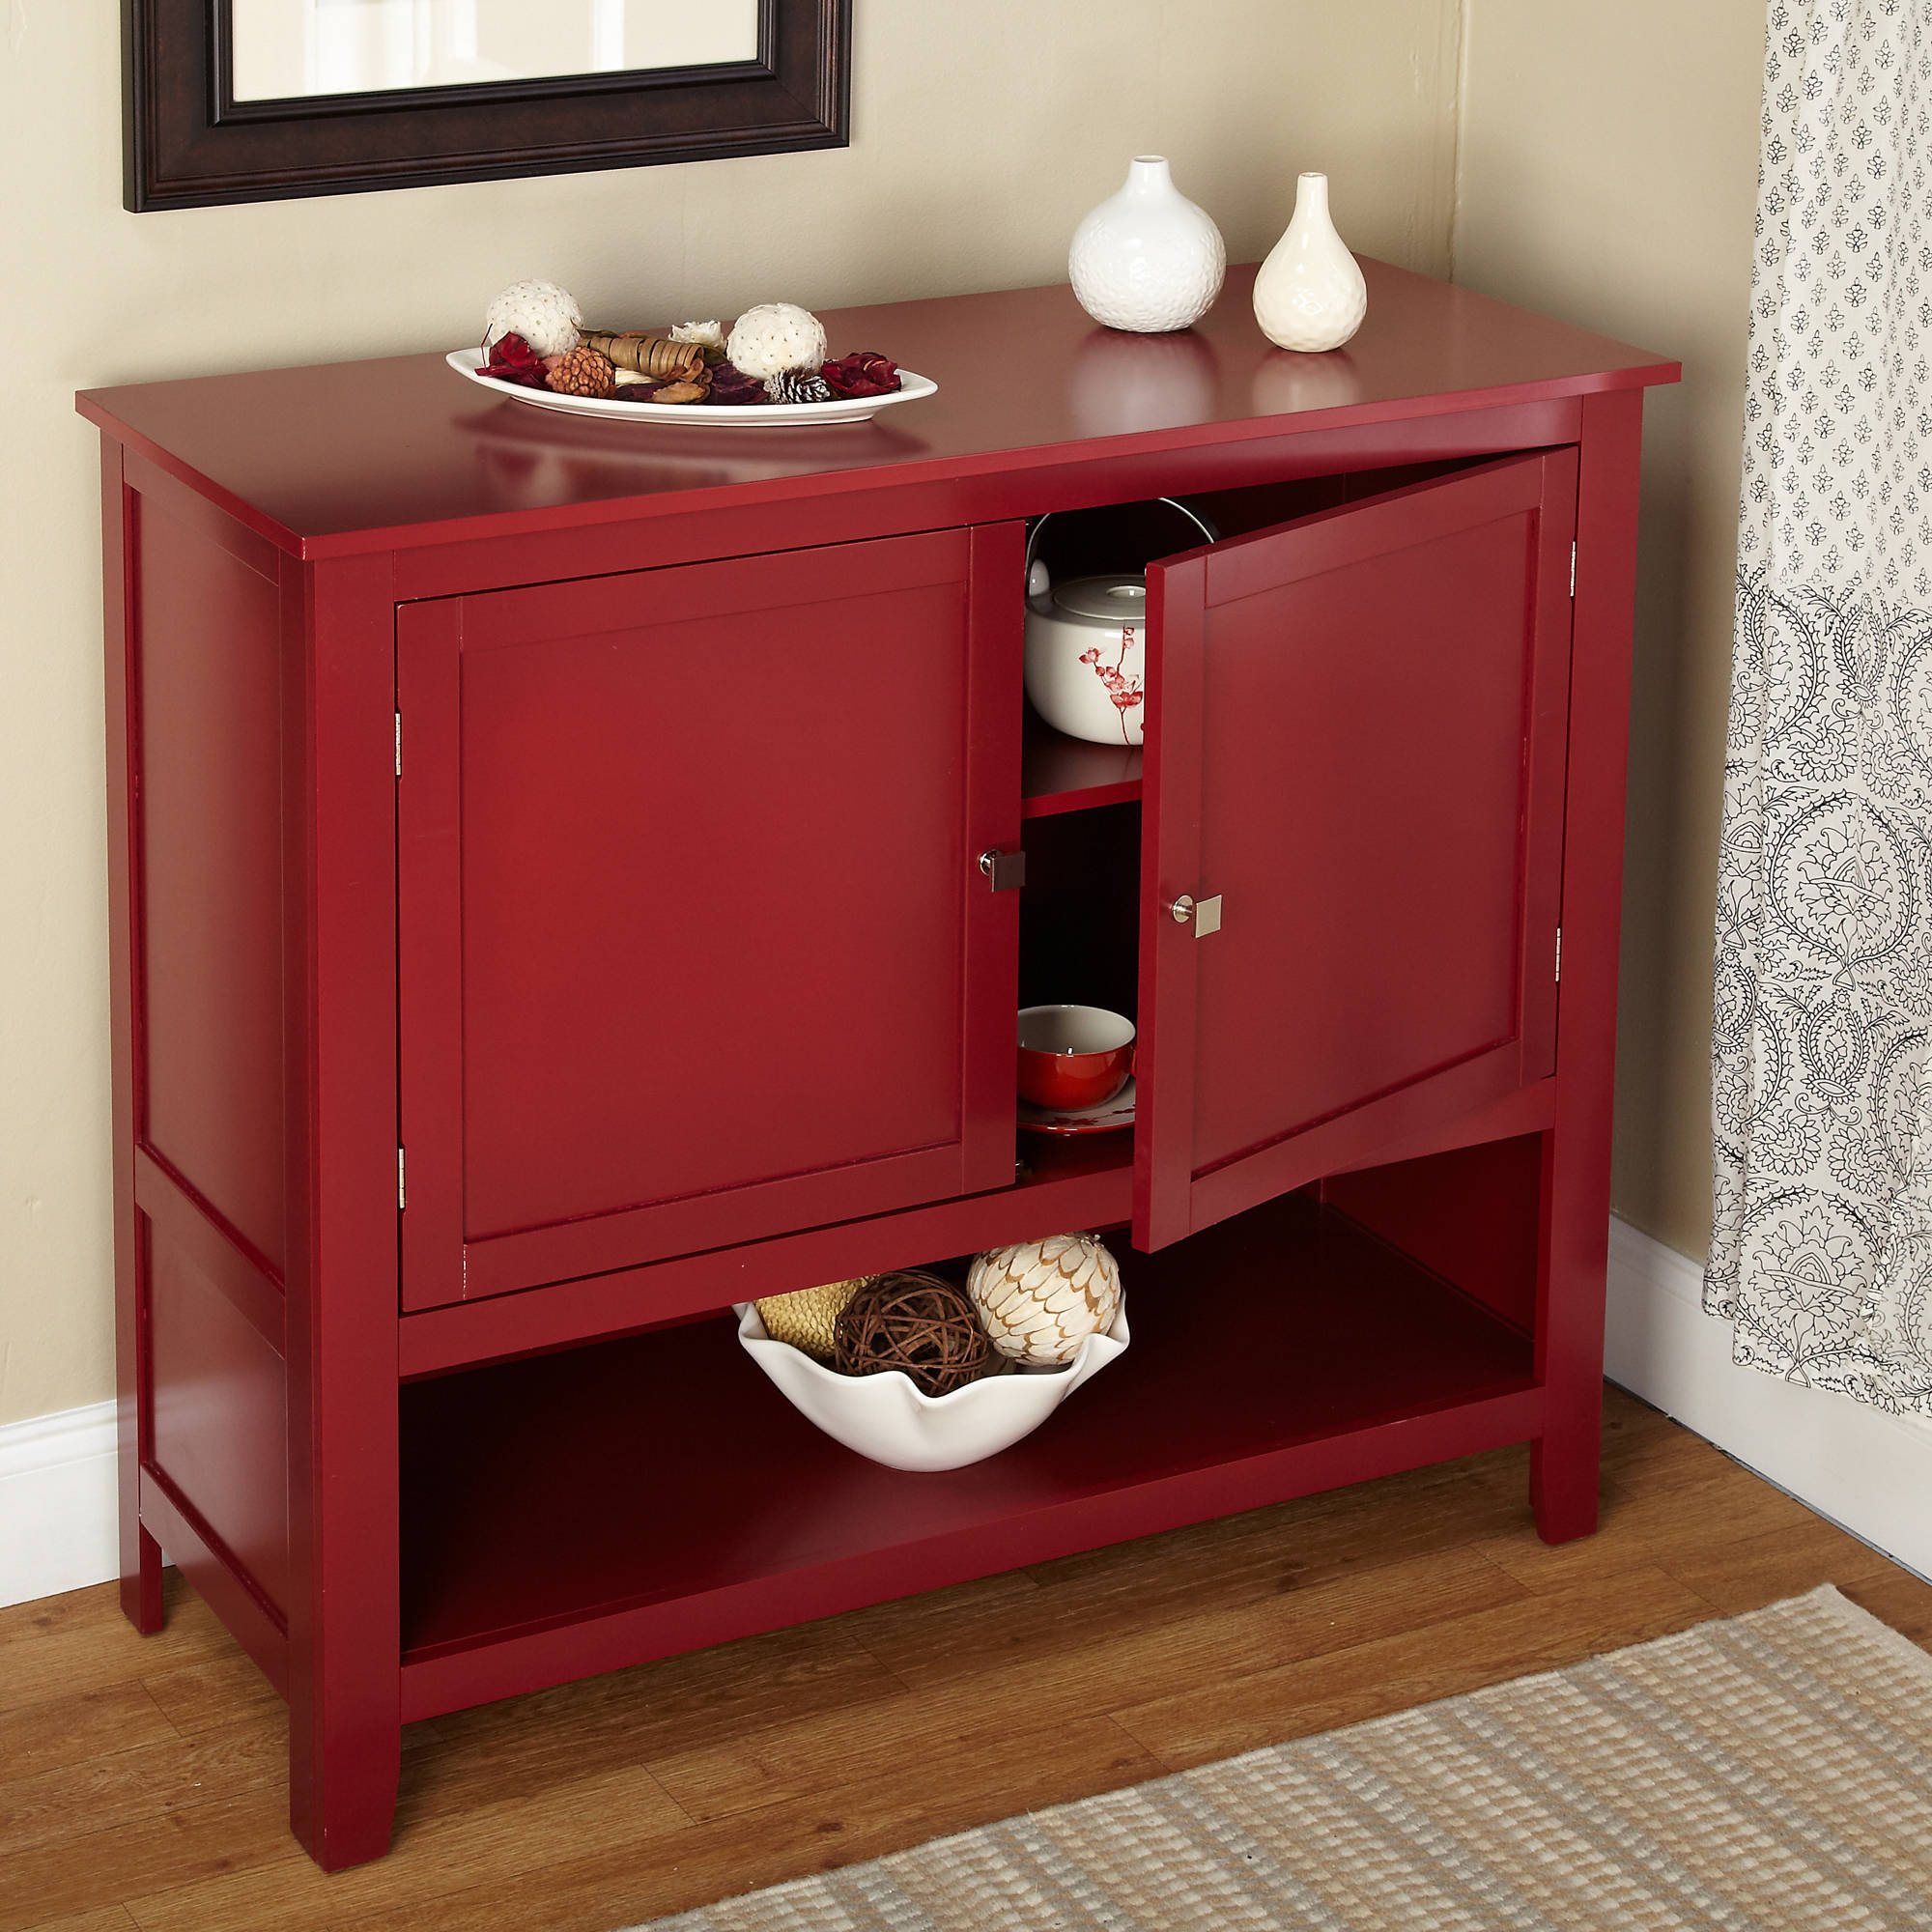 Montego Buffet, Multiple Colors - image 2 of 3